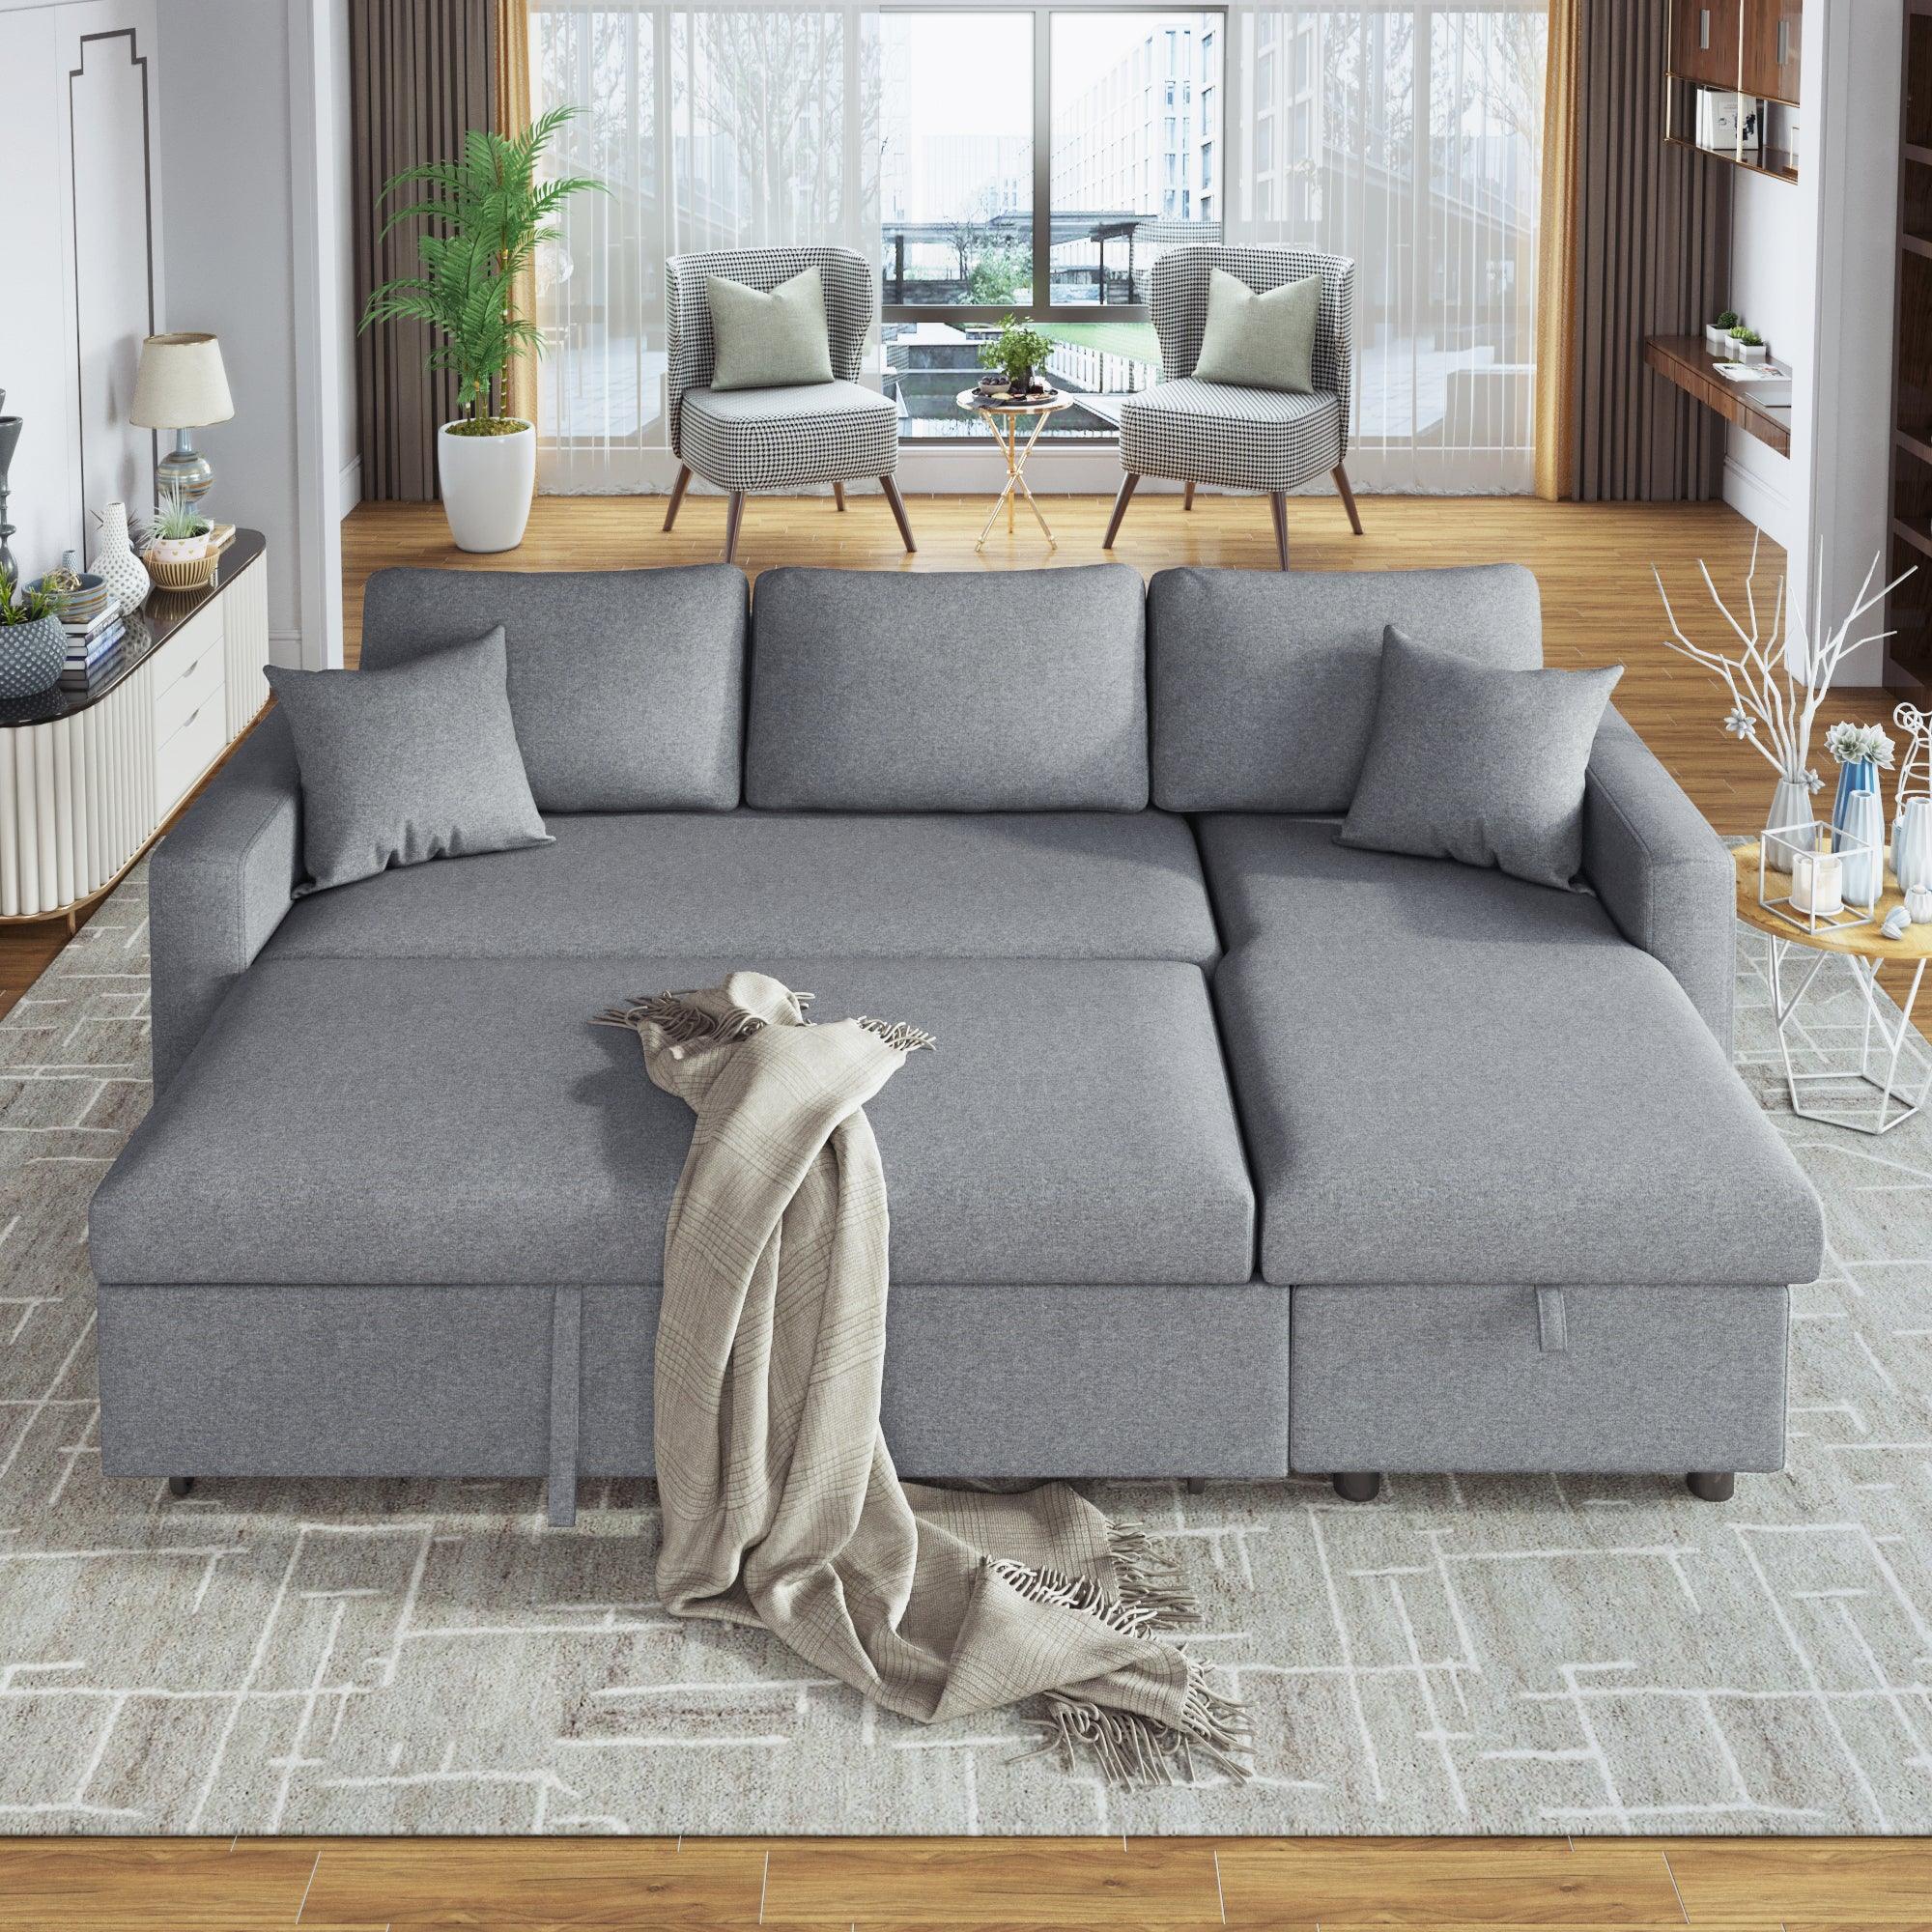 🆓🚛Upholstery Sleeper Sectional Sofa Gray With Storage Space, 2 Tossing Cushions